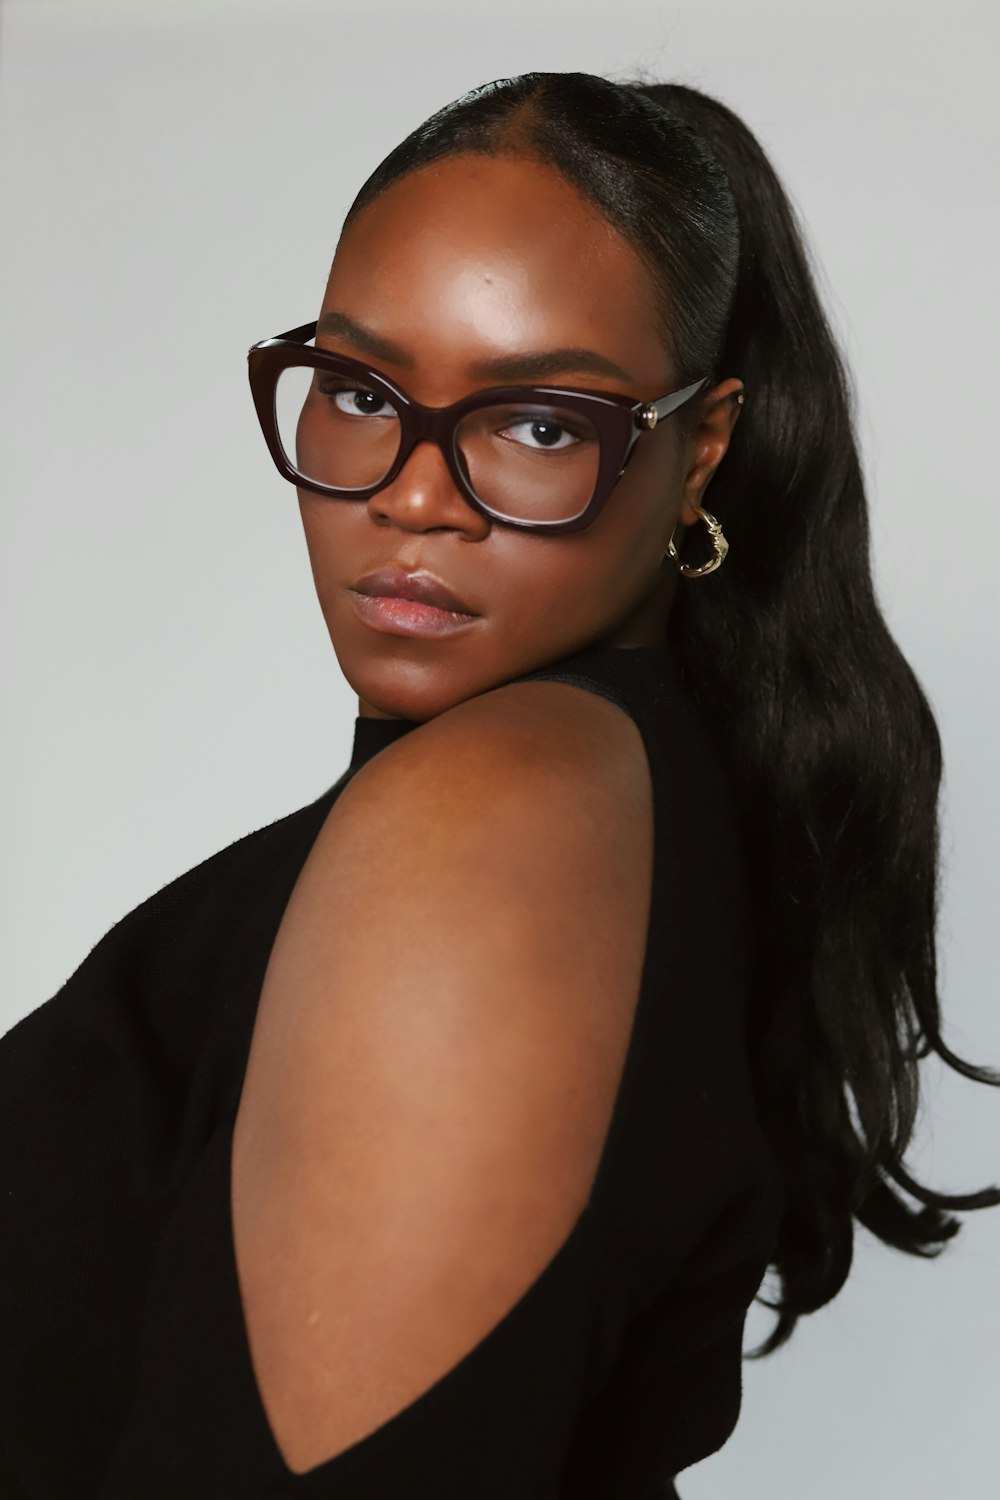 a woman wearing glasses and a black top